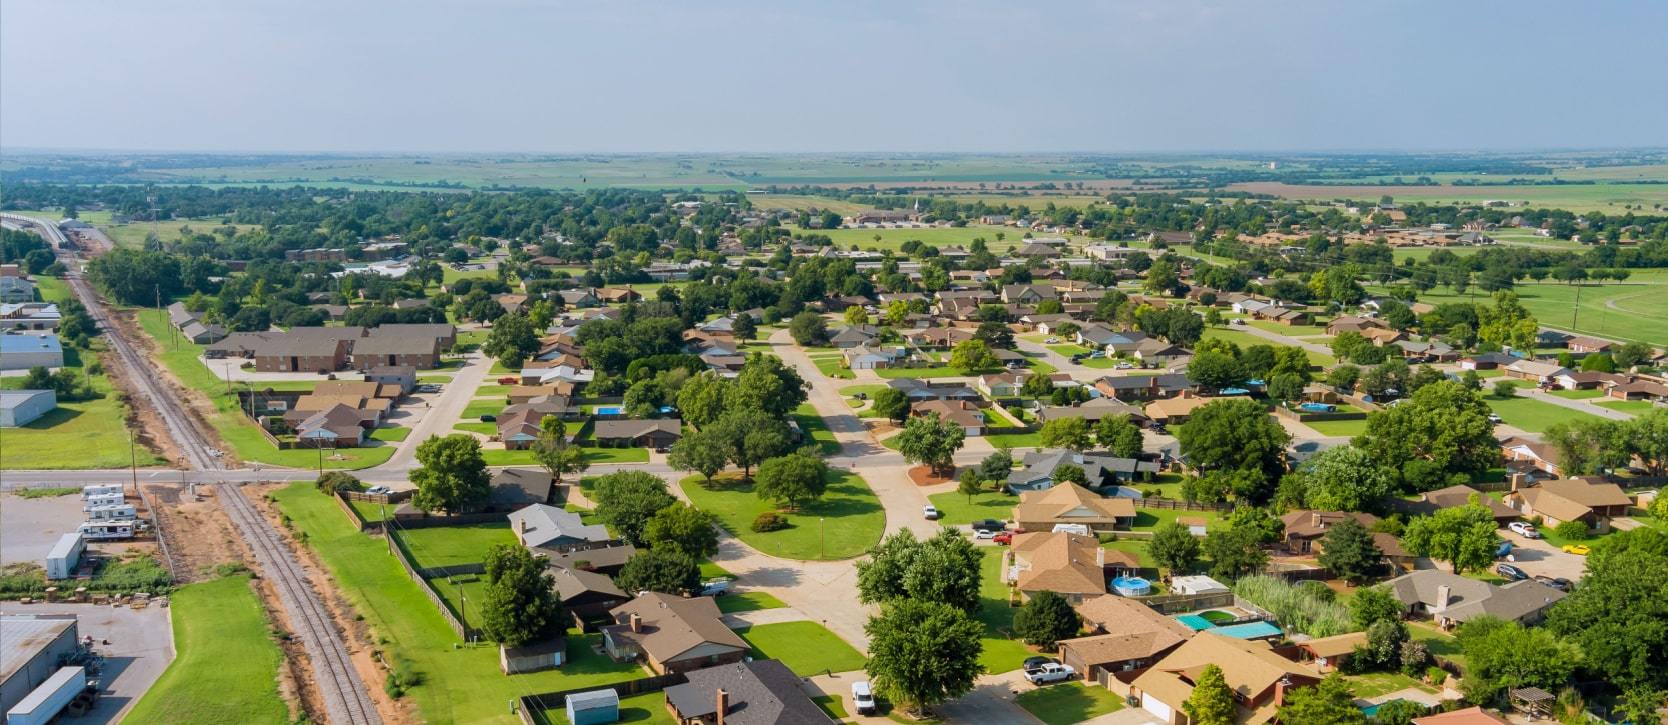 Aerial view of residential suburb in Oklahoma City